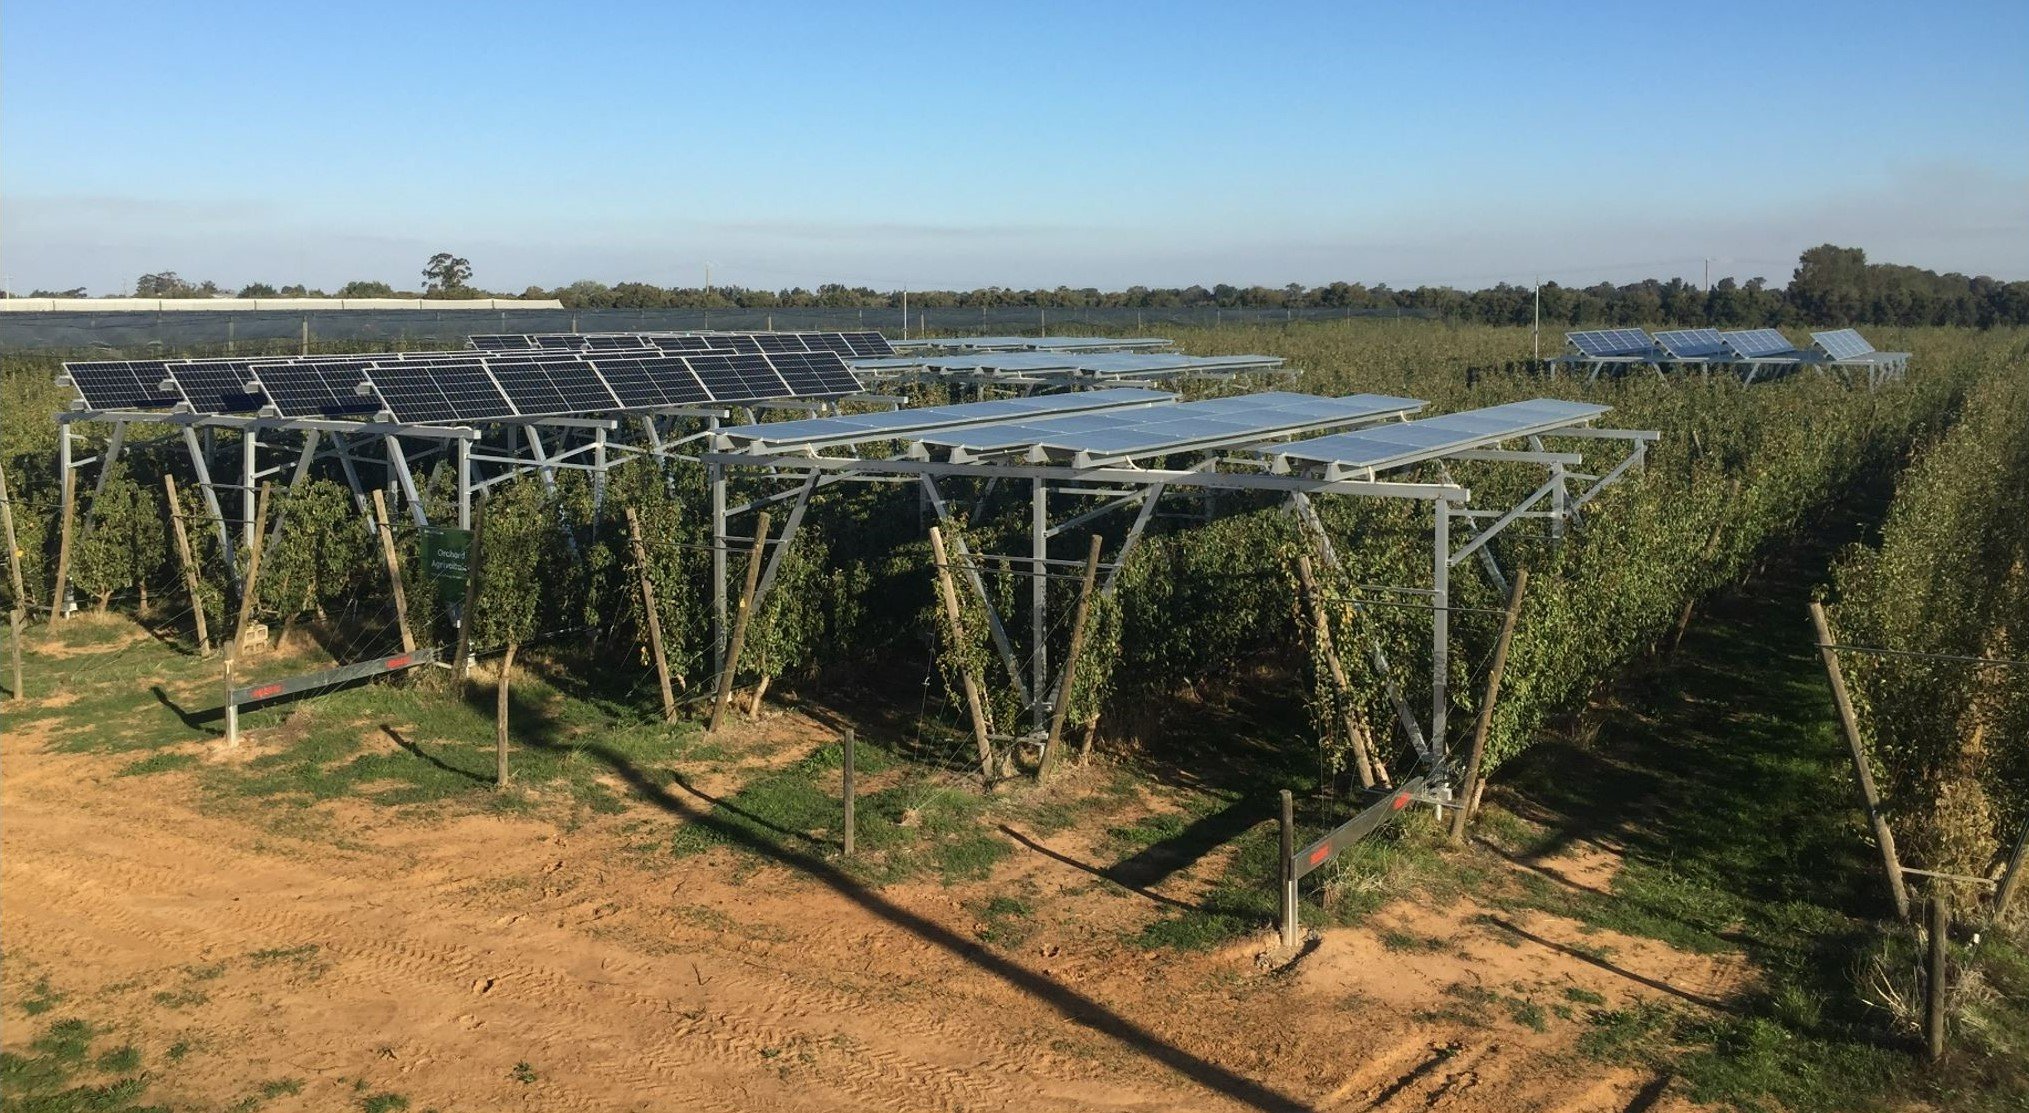 Agrivoltaic cells over a pear orchard